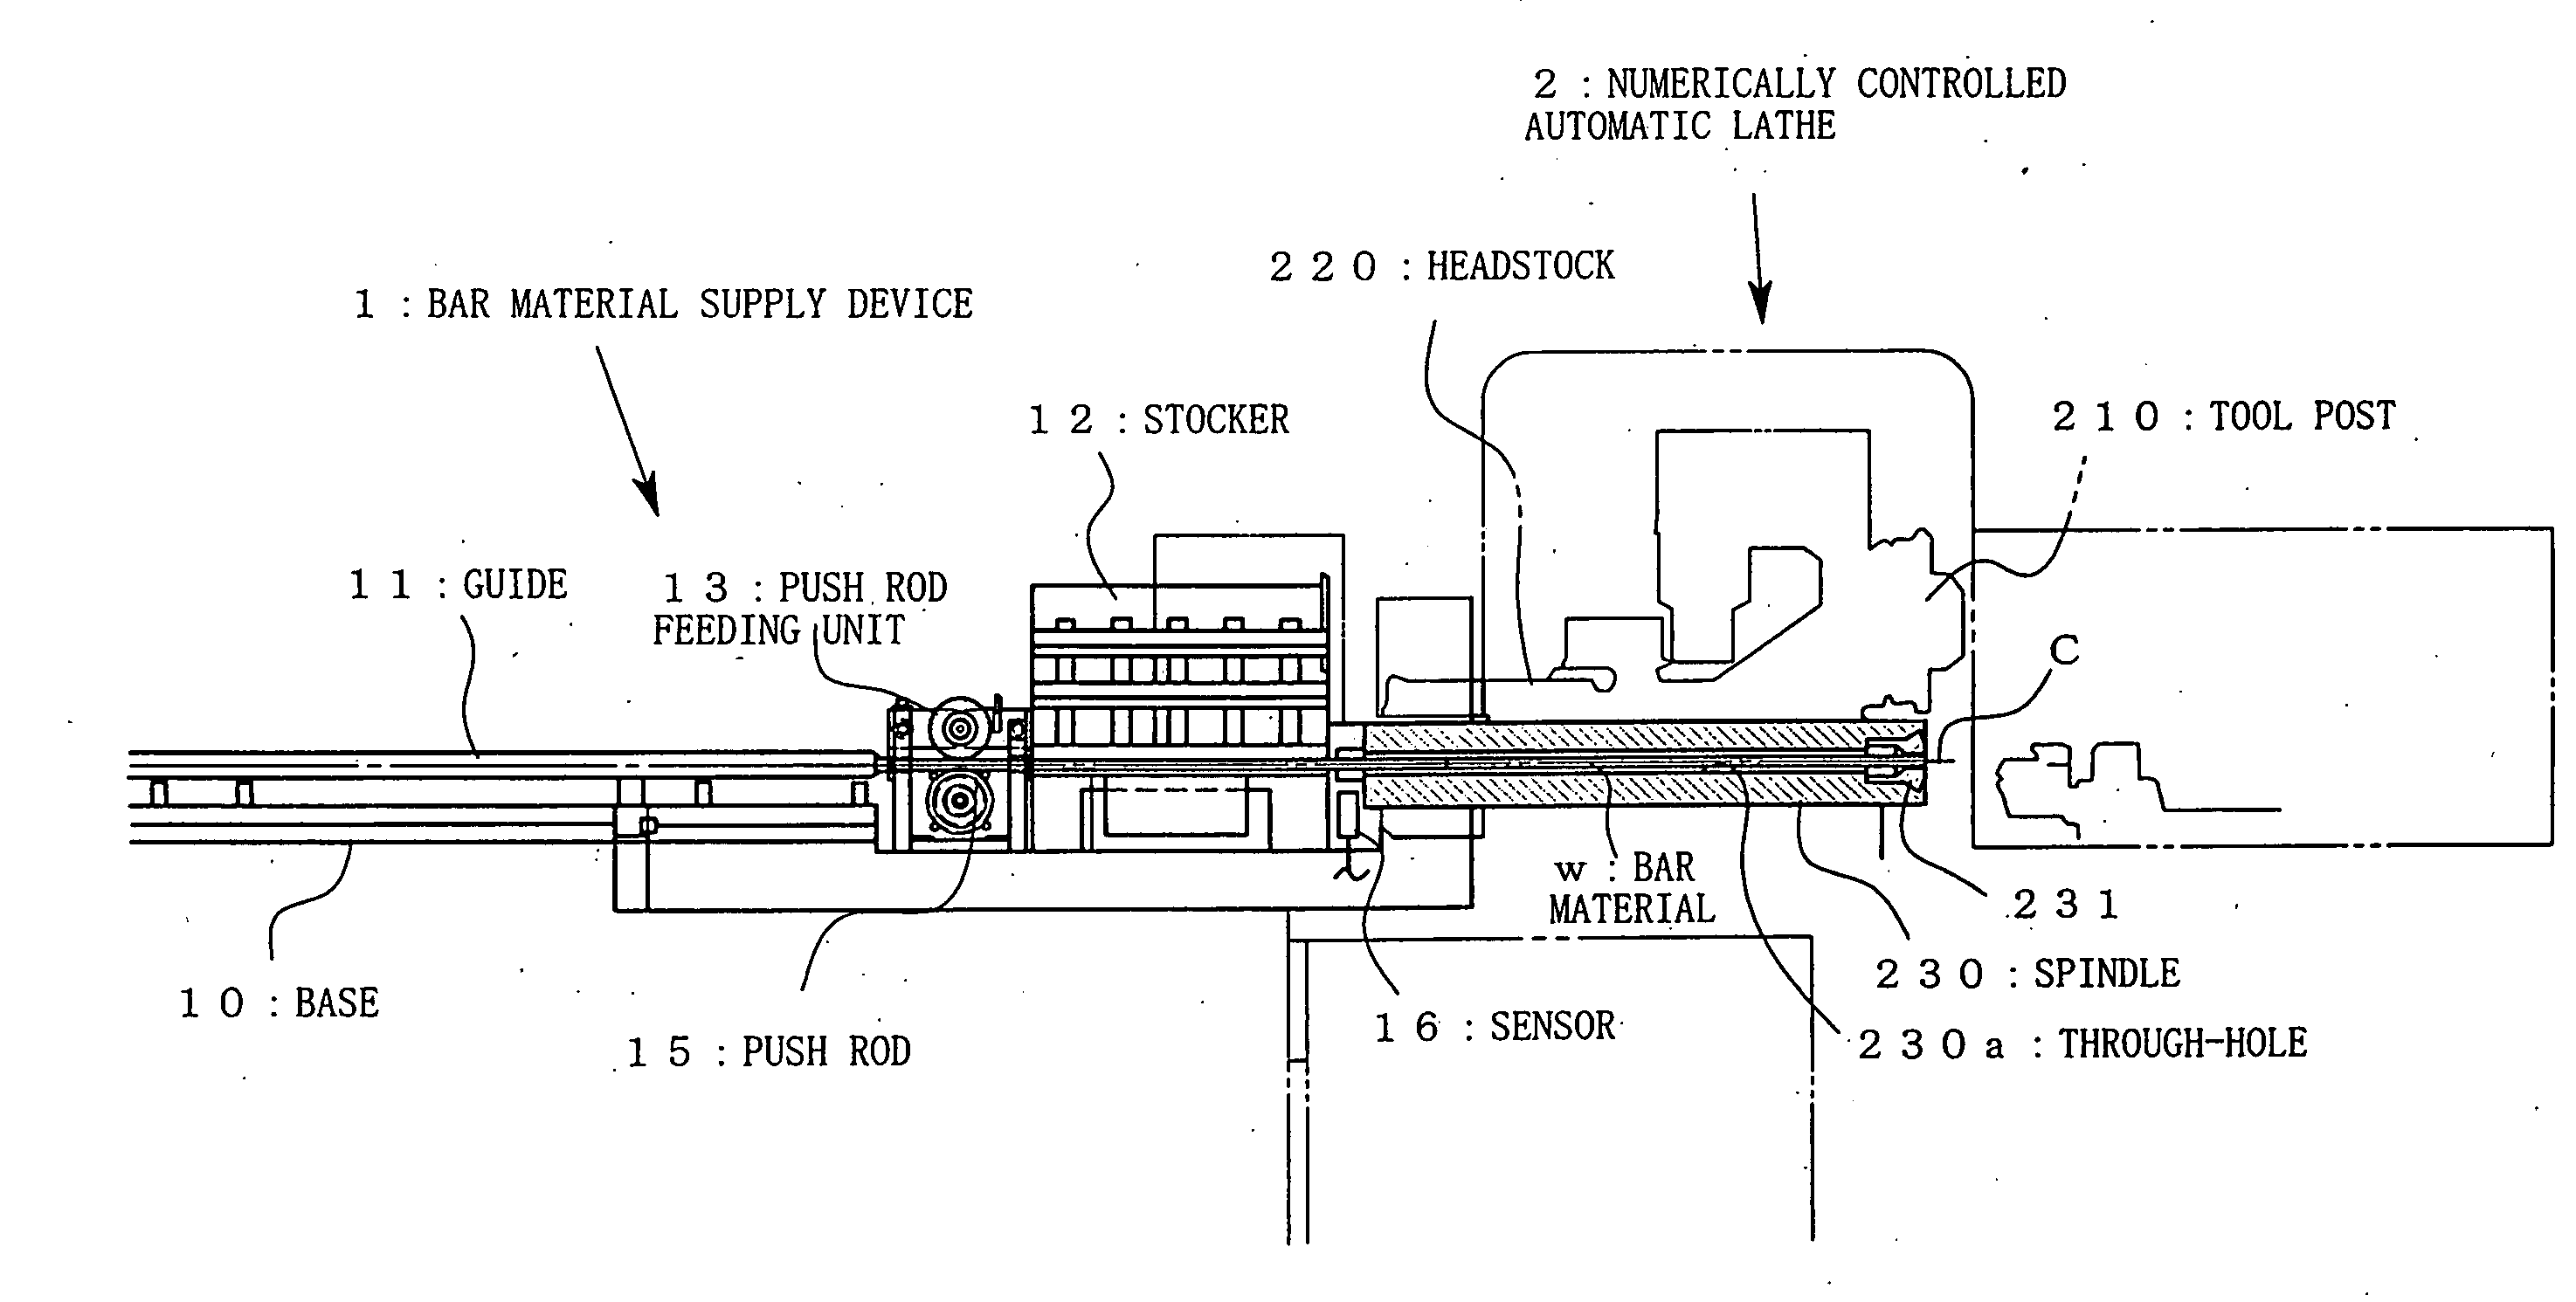 Bar material supply device of numerically controlled automatic lathe